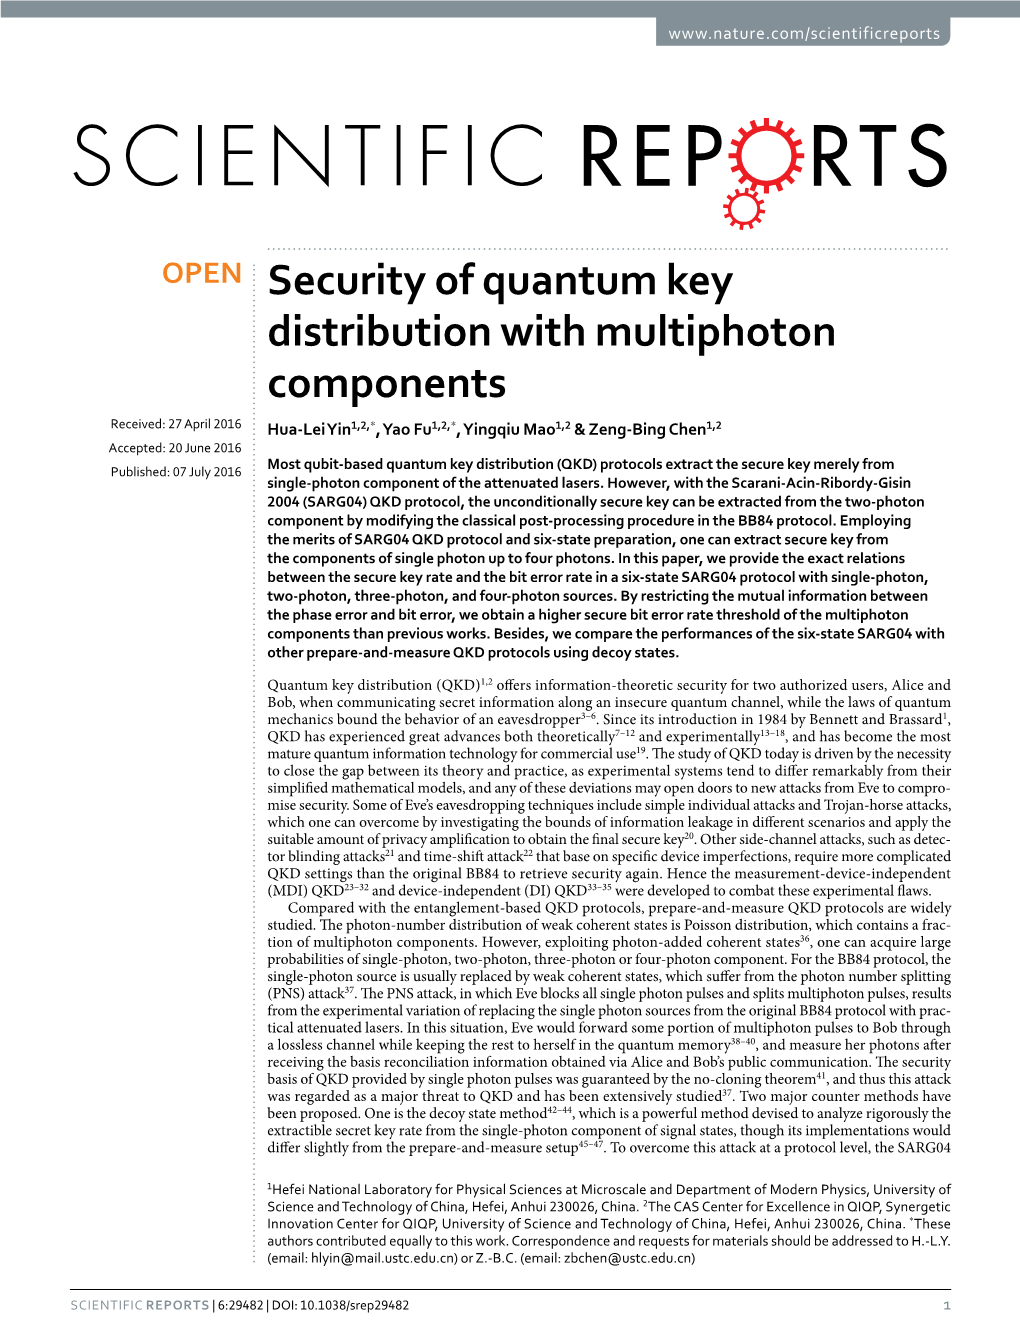 Security of Quantum Key Distribution with Multiphoton Components